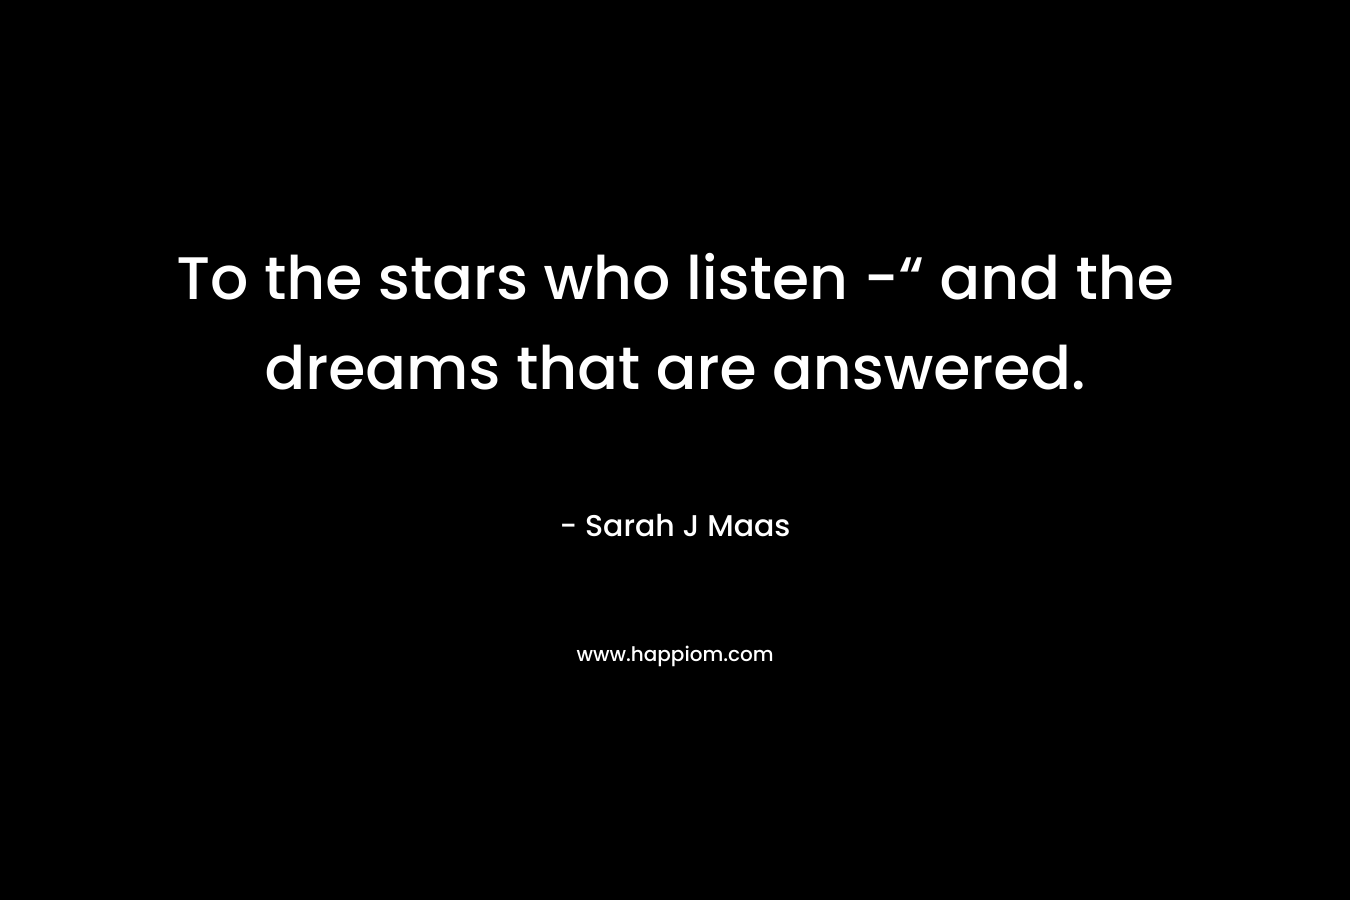 To the stars who listen -“ and the dreams that are answered.